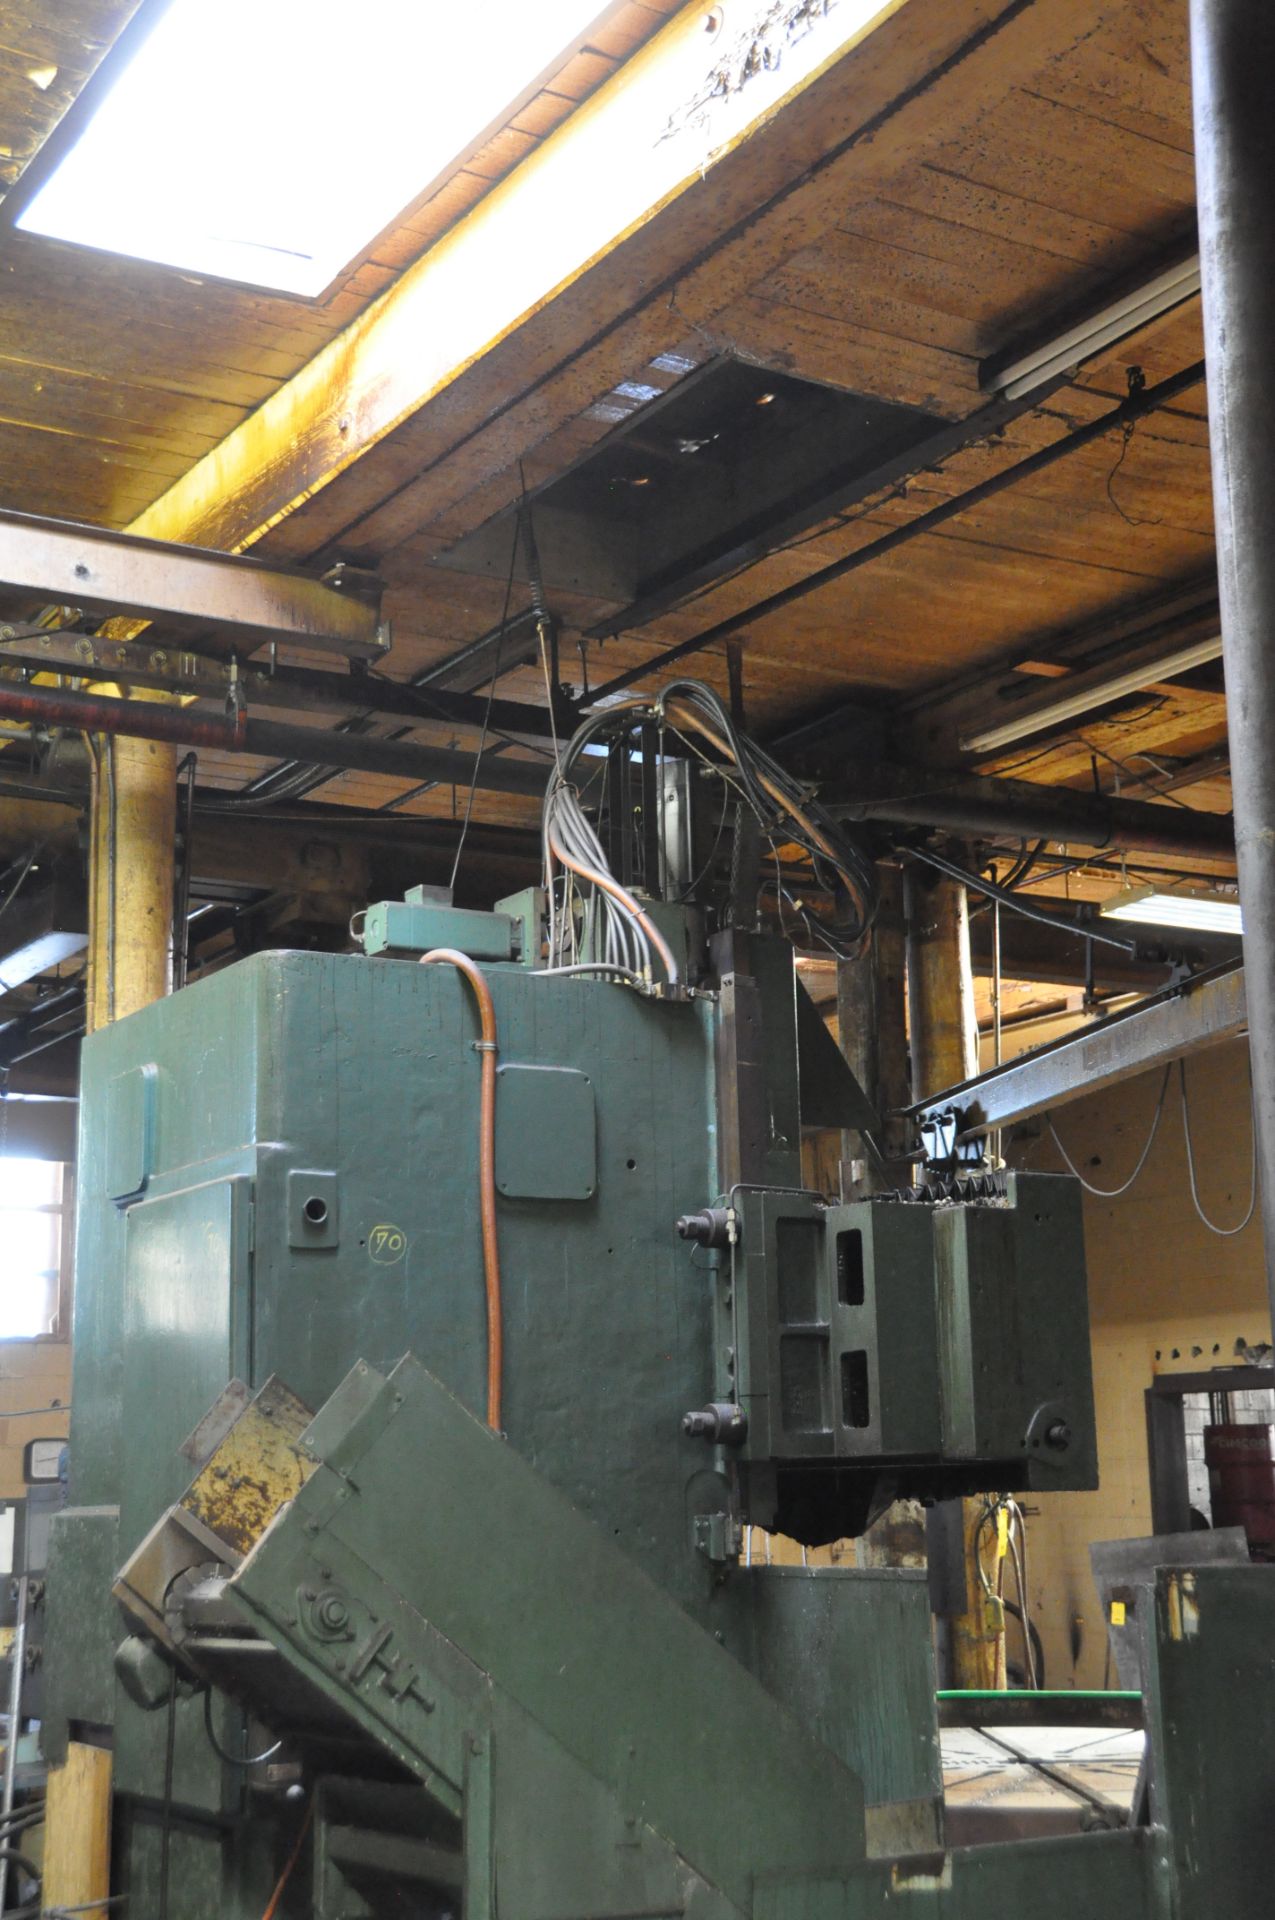 WEBSTER BENNETT CNC VERTICAL BORING MILL, 72" DIA. TABLE, 4 JAW CHUCK… - Image 7 of 8